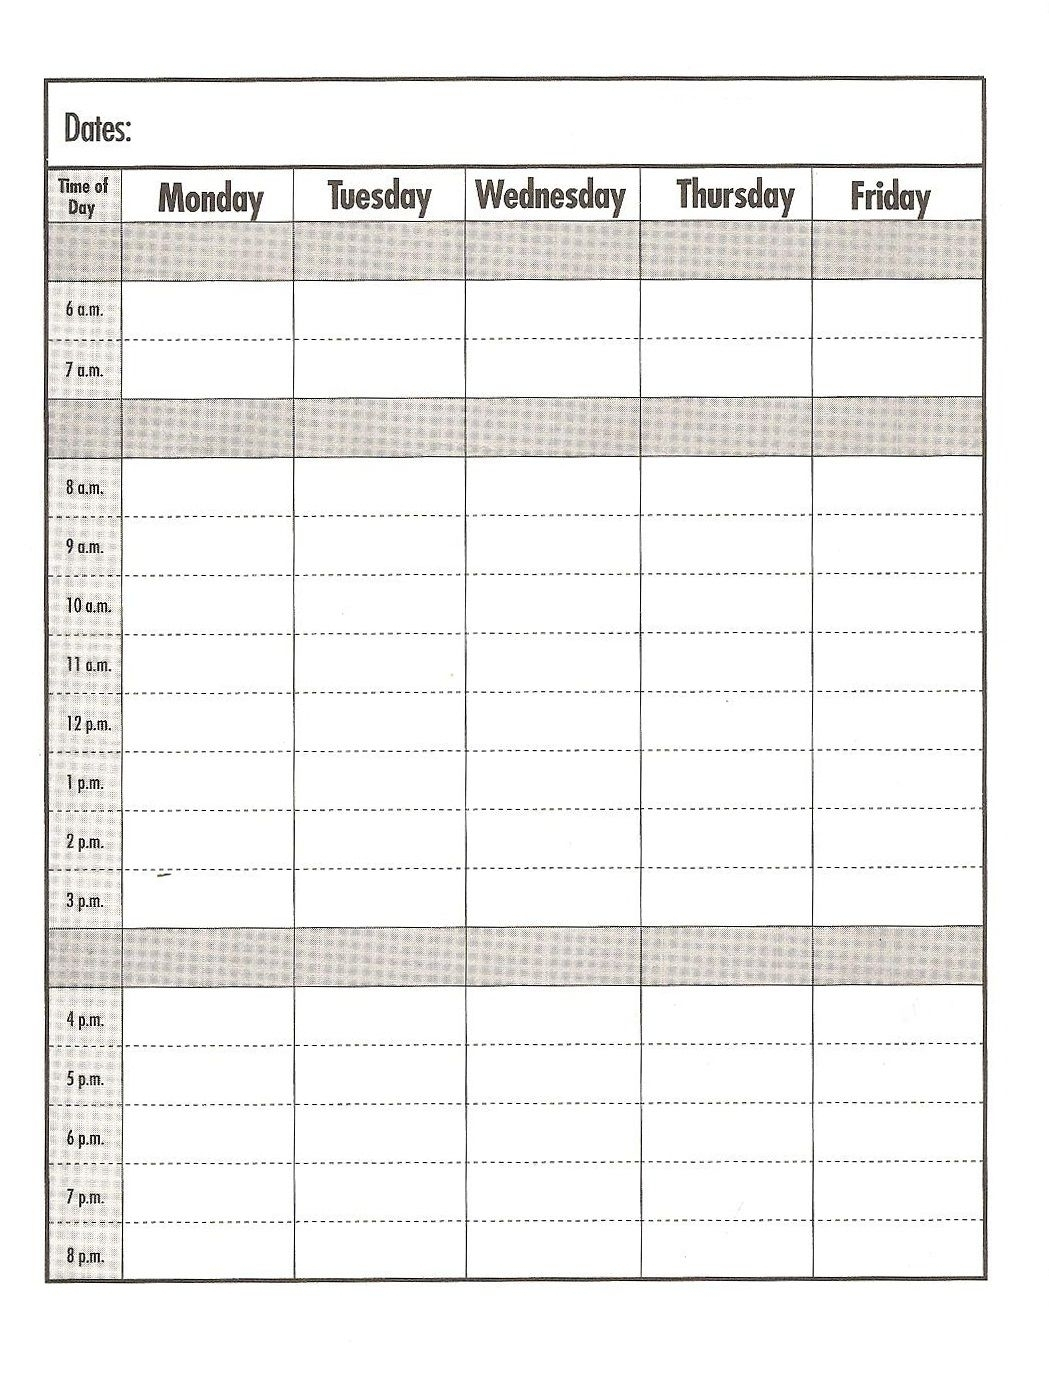 Free Calendar Print Out Pages Daily With Time Slots On